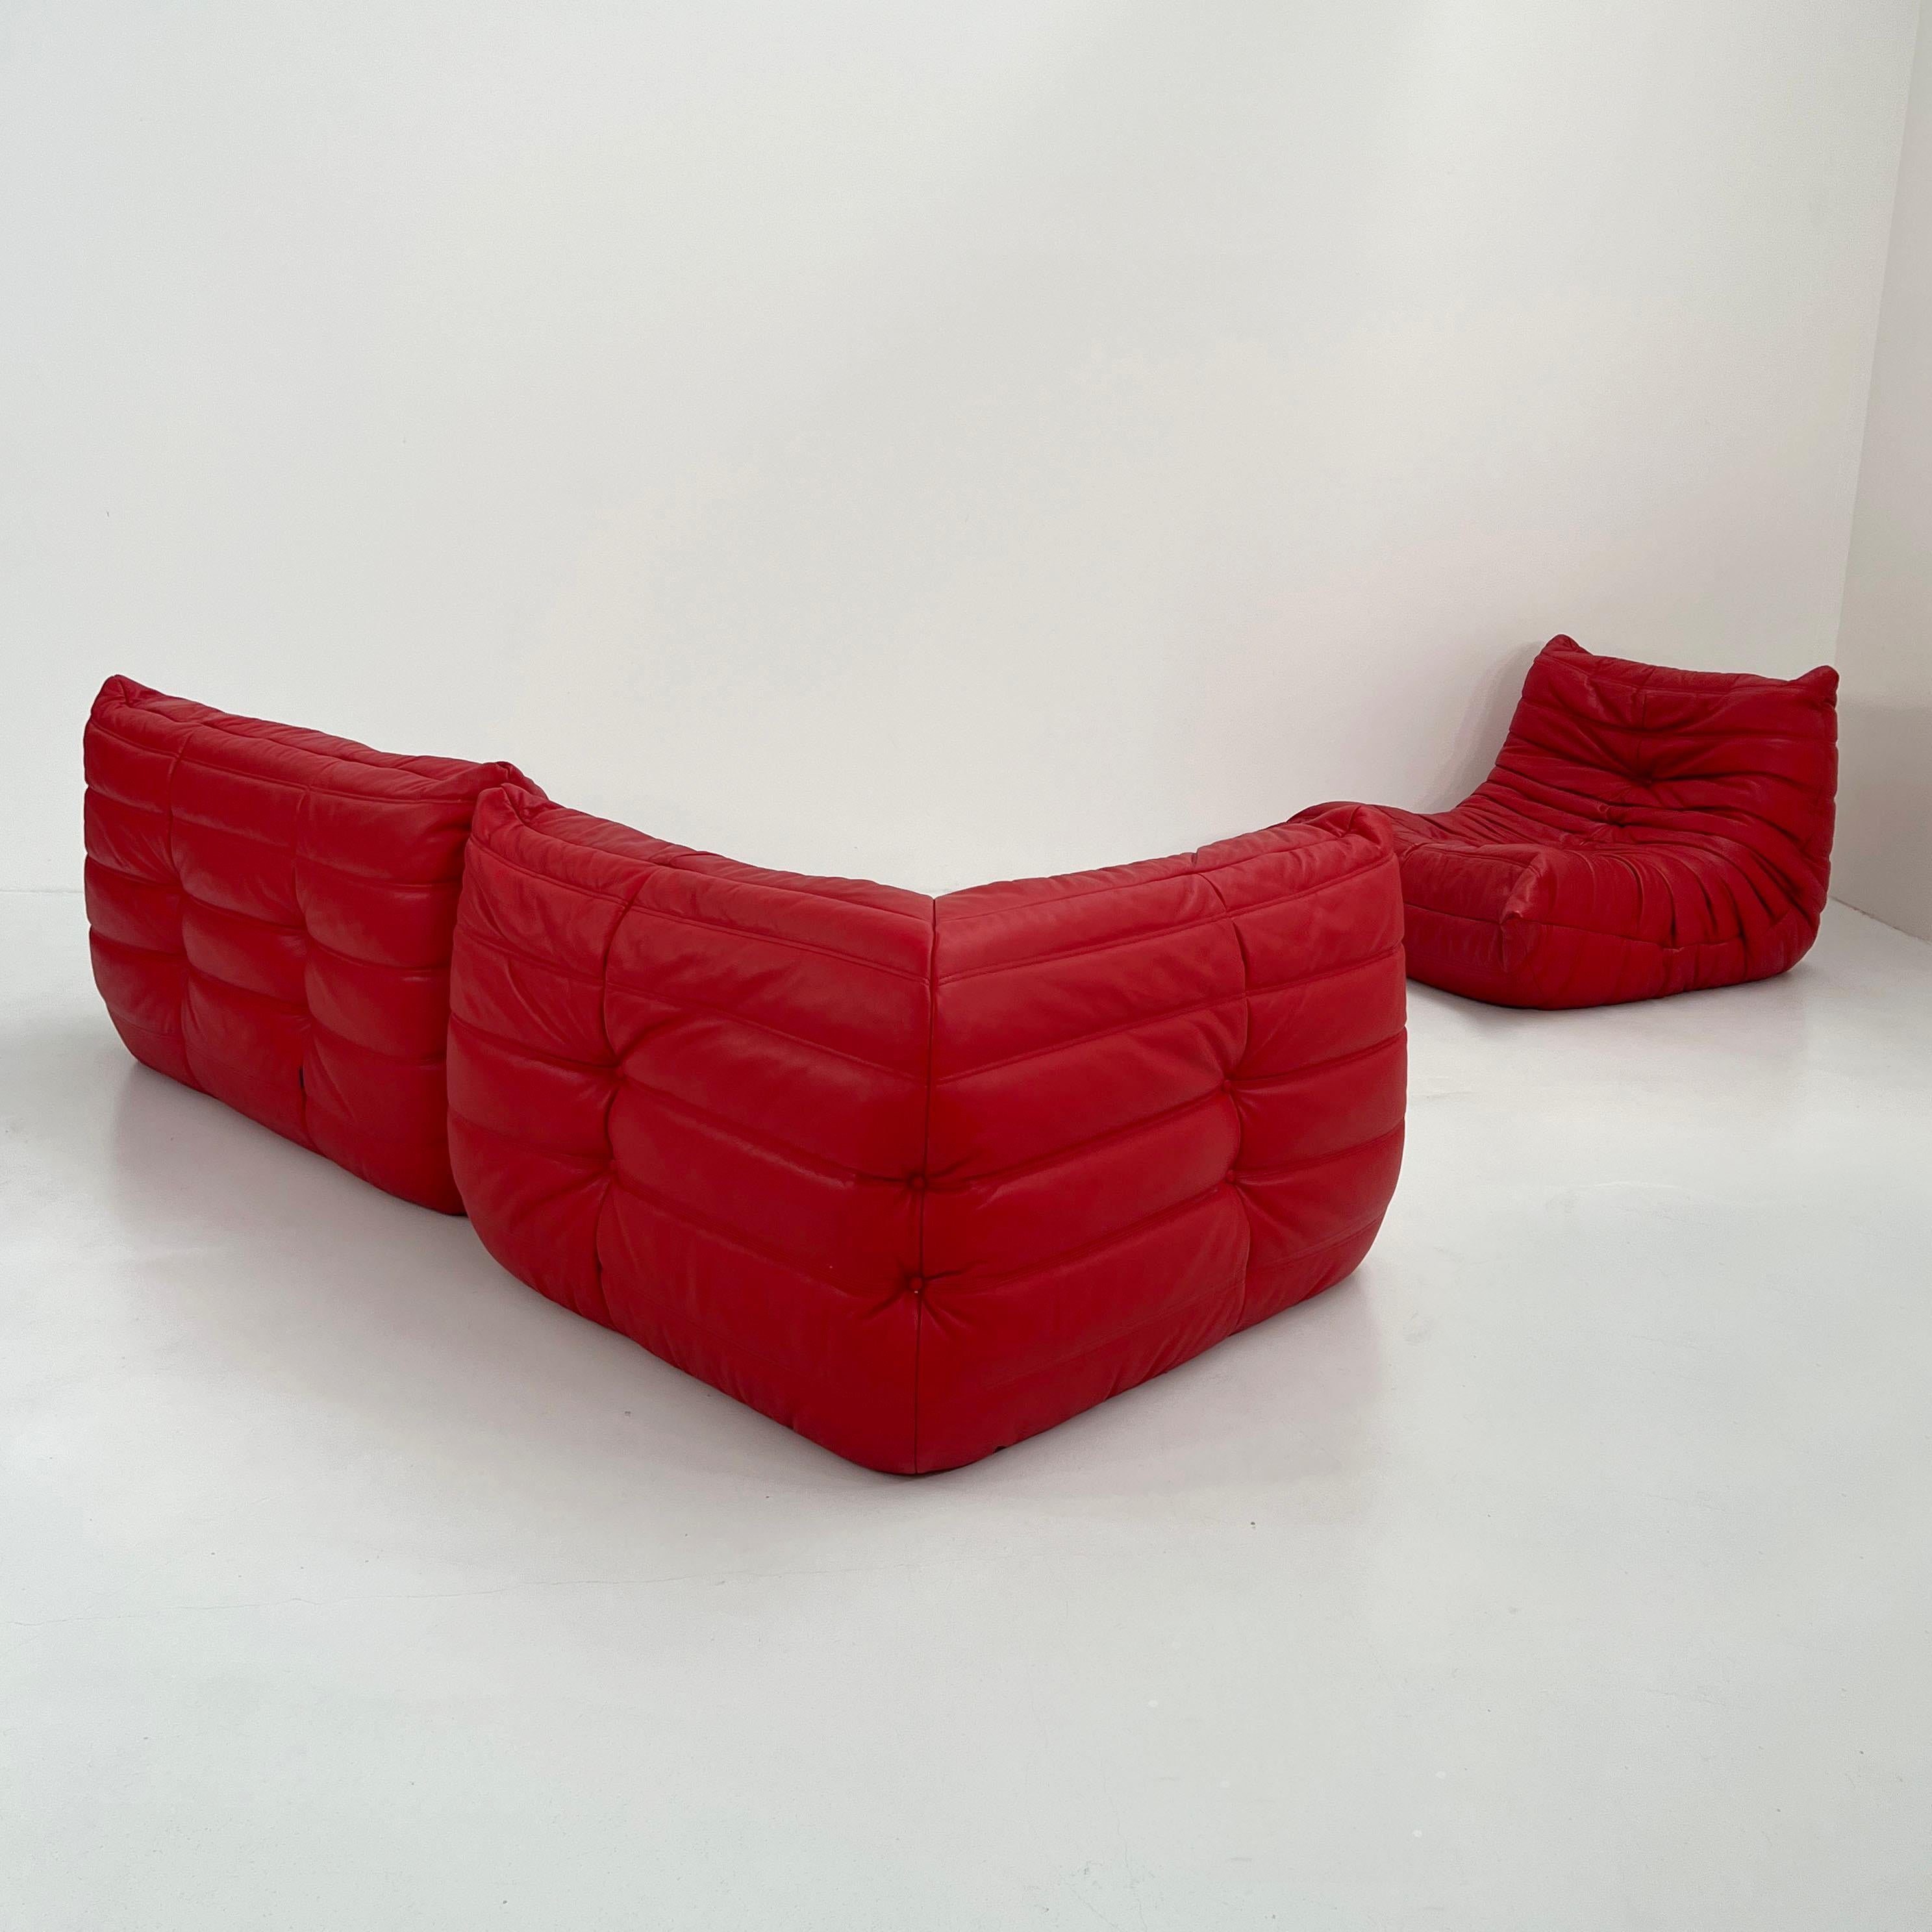 Togo Sofa Set in Red Leather by Michel Ducaroy for Ligne Roset, 1970s For Sale 2